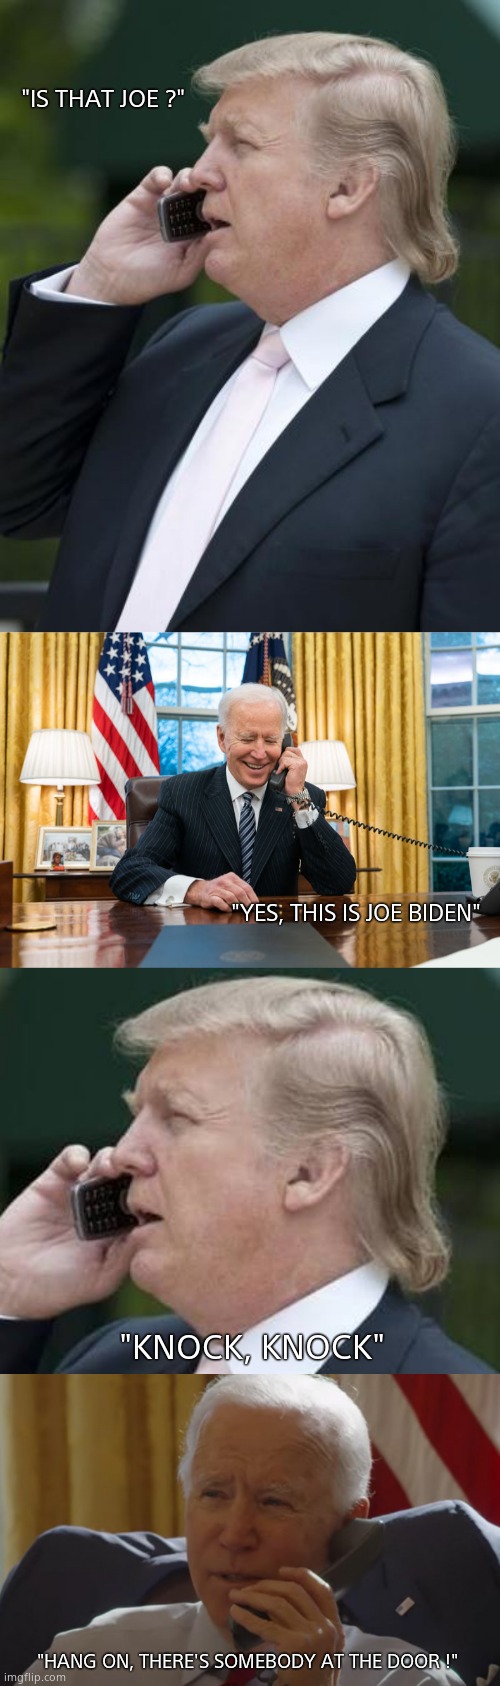 Knock Knock, who's there ? Joe's not. | "IS THAT JOE ?"; "YES, THIS IS JOE BIDEN"; "KNOCK, KNOCK"; "HANG ON, THERE'S SOMEBODY AT THE DOOR !" | image tagged in memes,trump,biden,phone call,knock knock,political meme | made w/ Imgflip meme maker